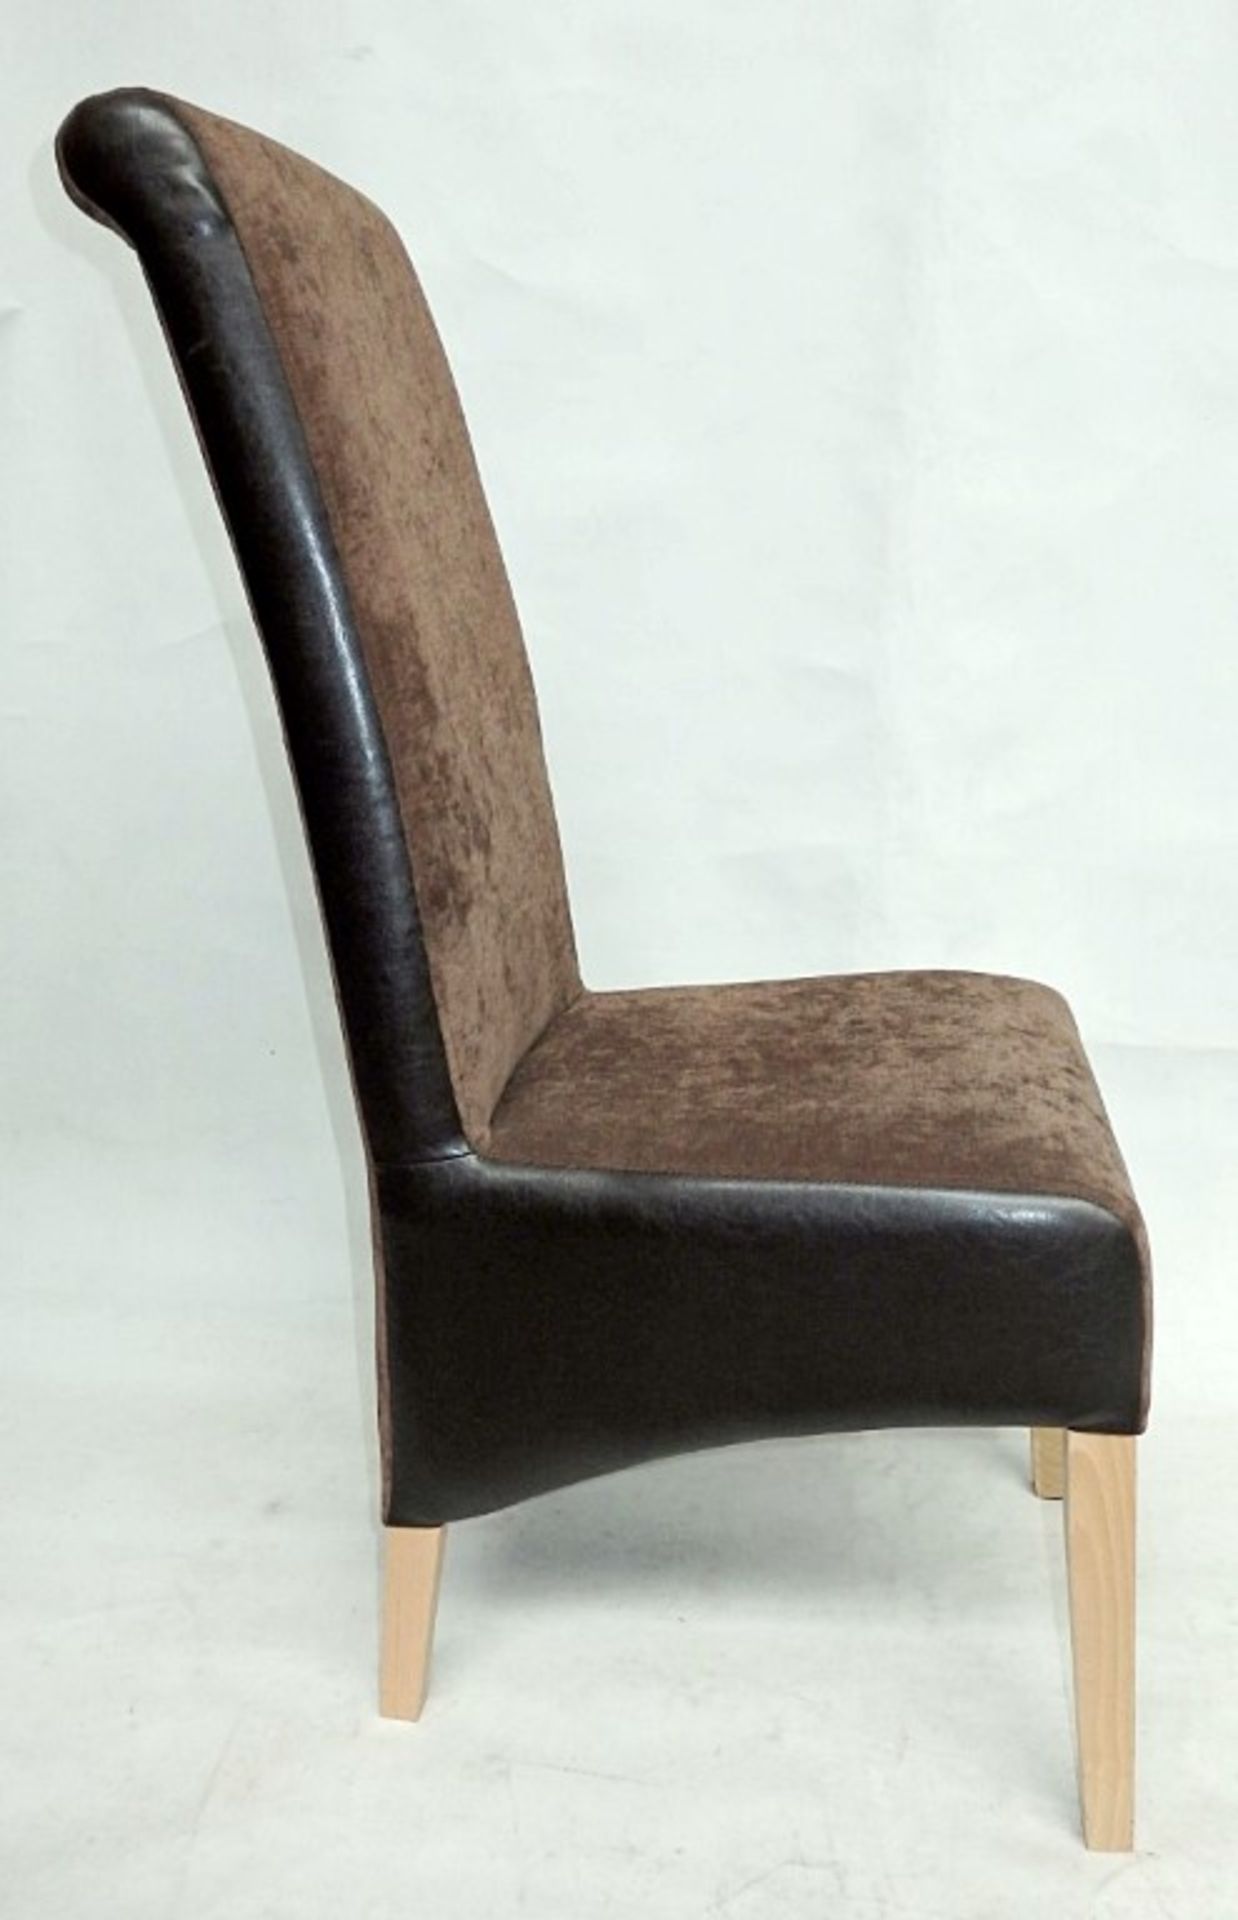 1 x Bespoke Highback Chair In A Rich Brown Chenile - Built And Upholstered By Professional British - Image 8 of 8